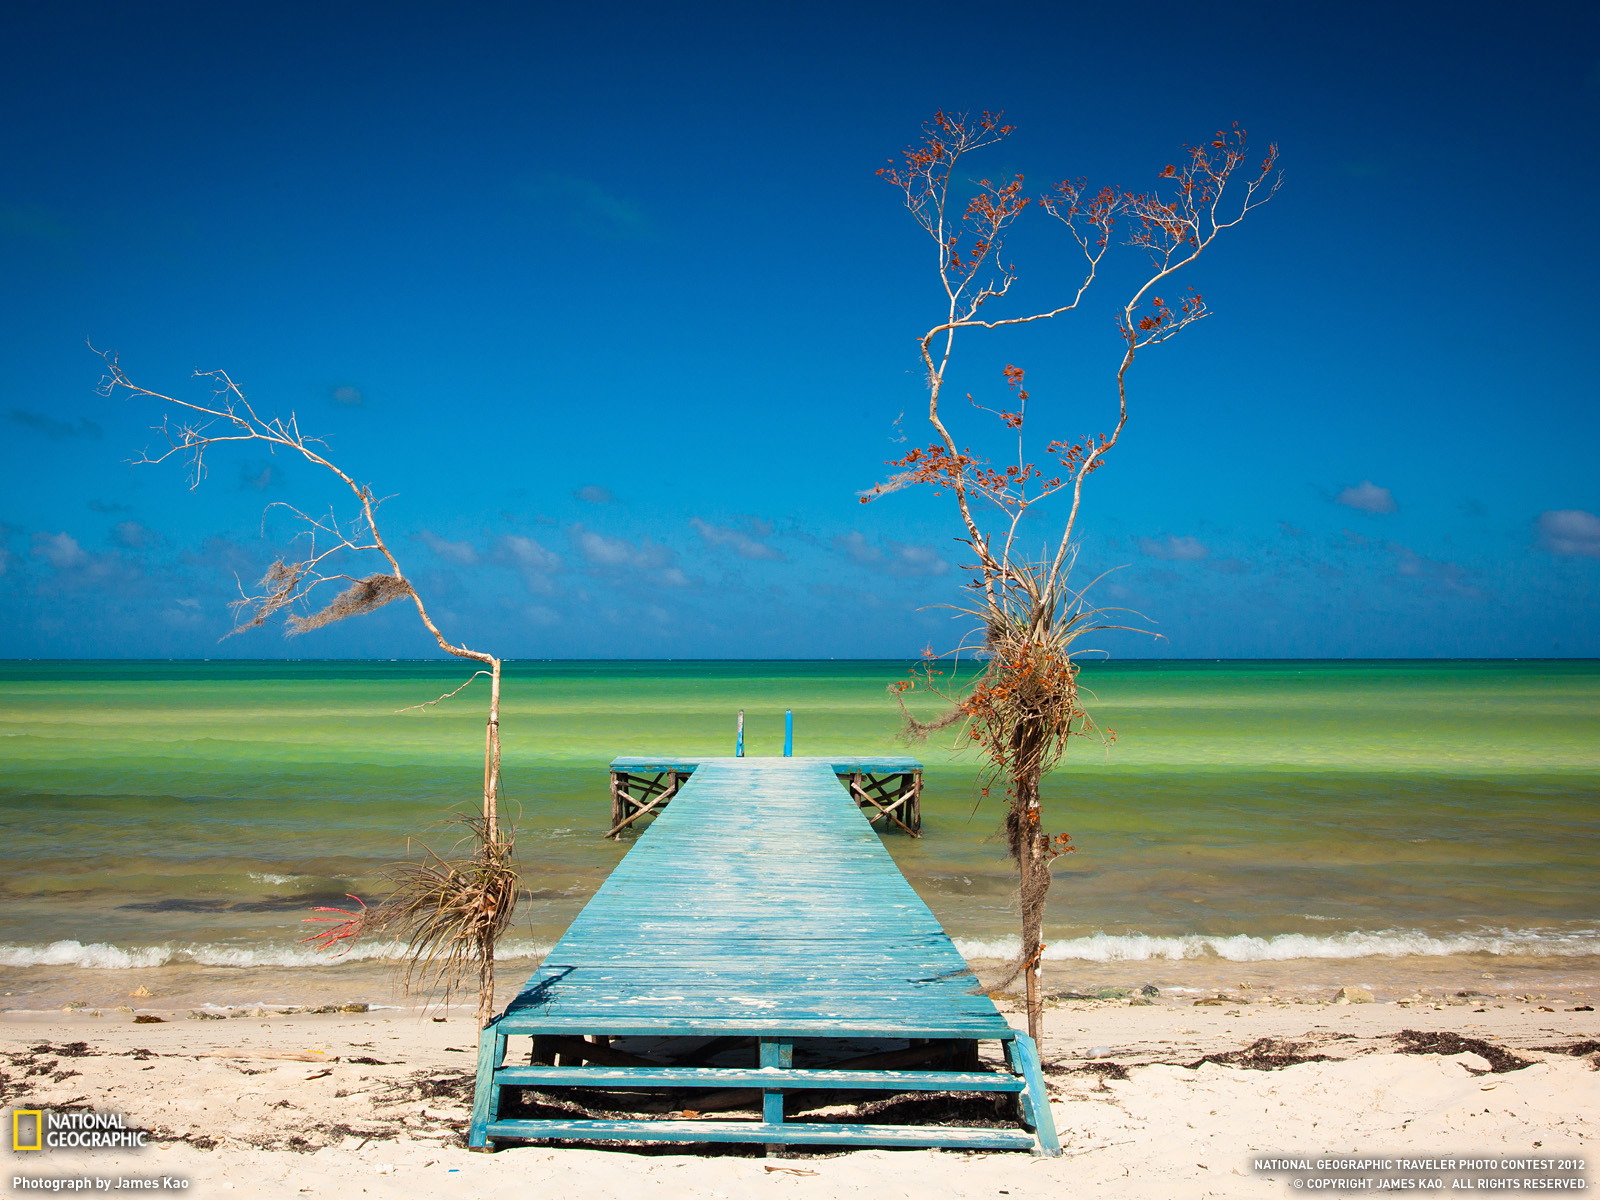 Cuba Picture Beach Wallpaper National Geographic Photo Of The